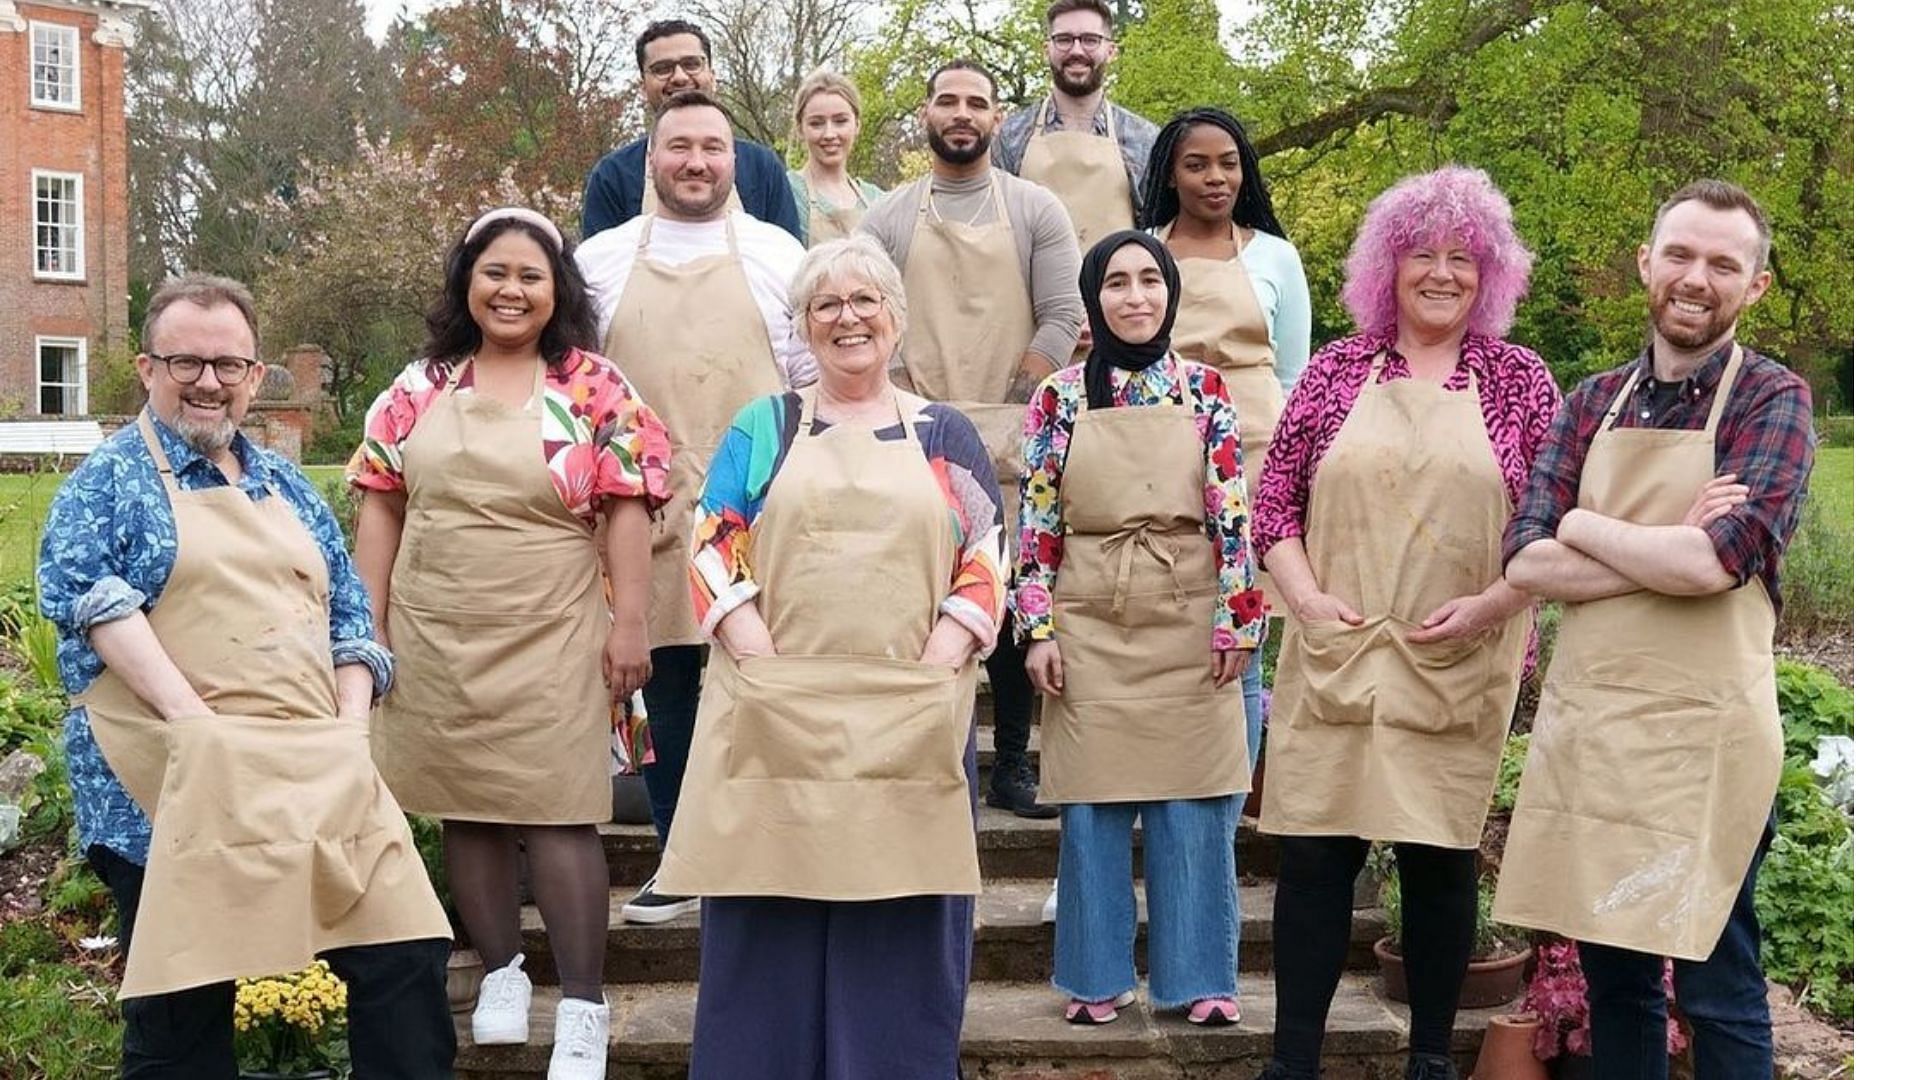 Contestants from The Great British Baking Show season 10